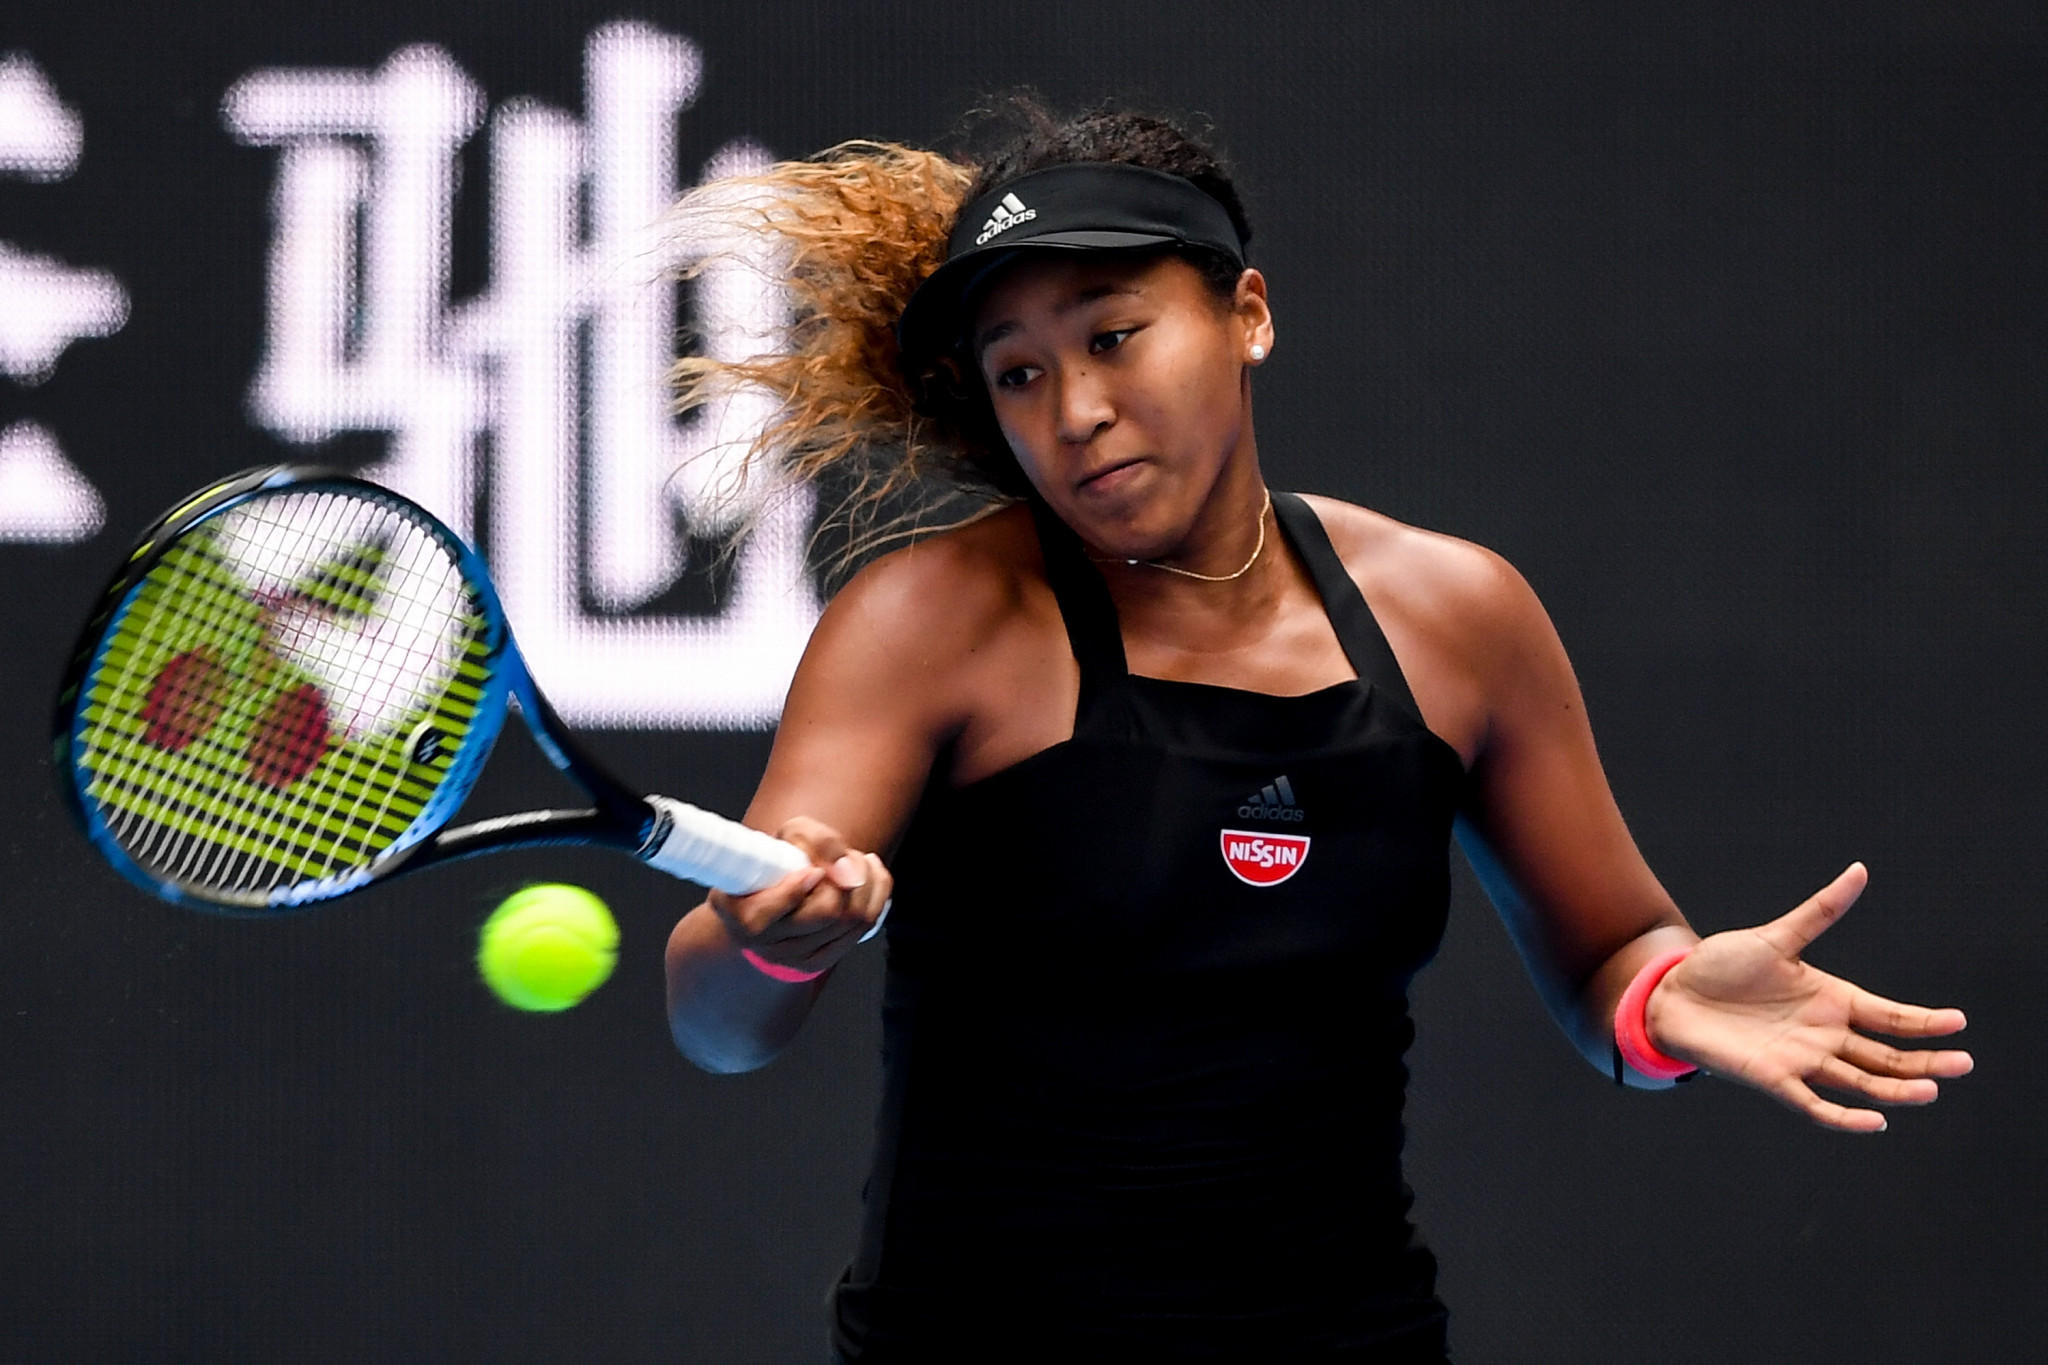 Naomi Osaka continues to make history after her US Open win as she is now the first Japanese female player to make it to the semi-finals of the China Open ©Getty Images